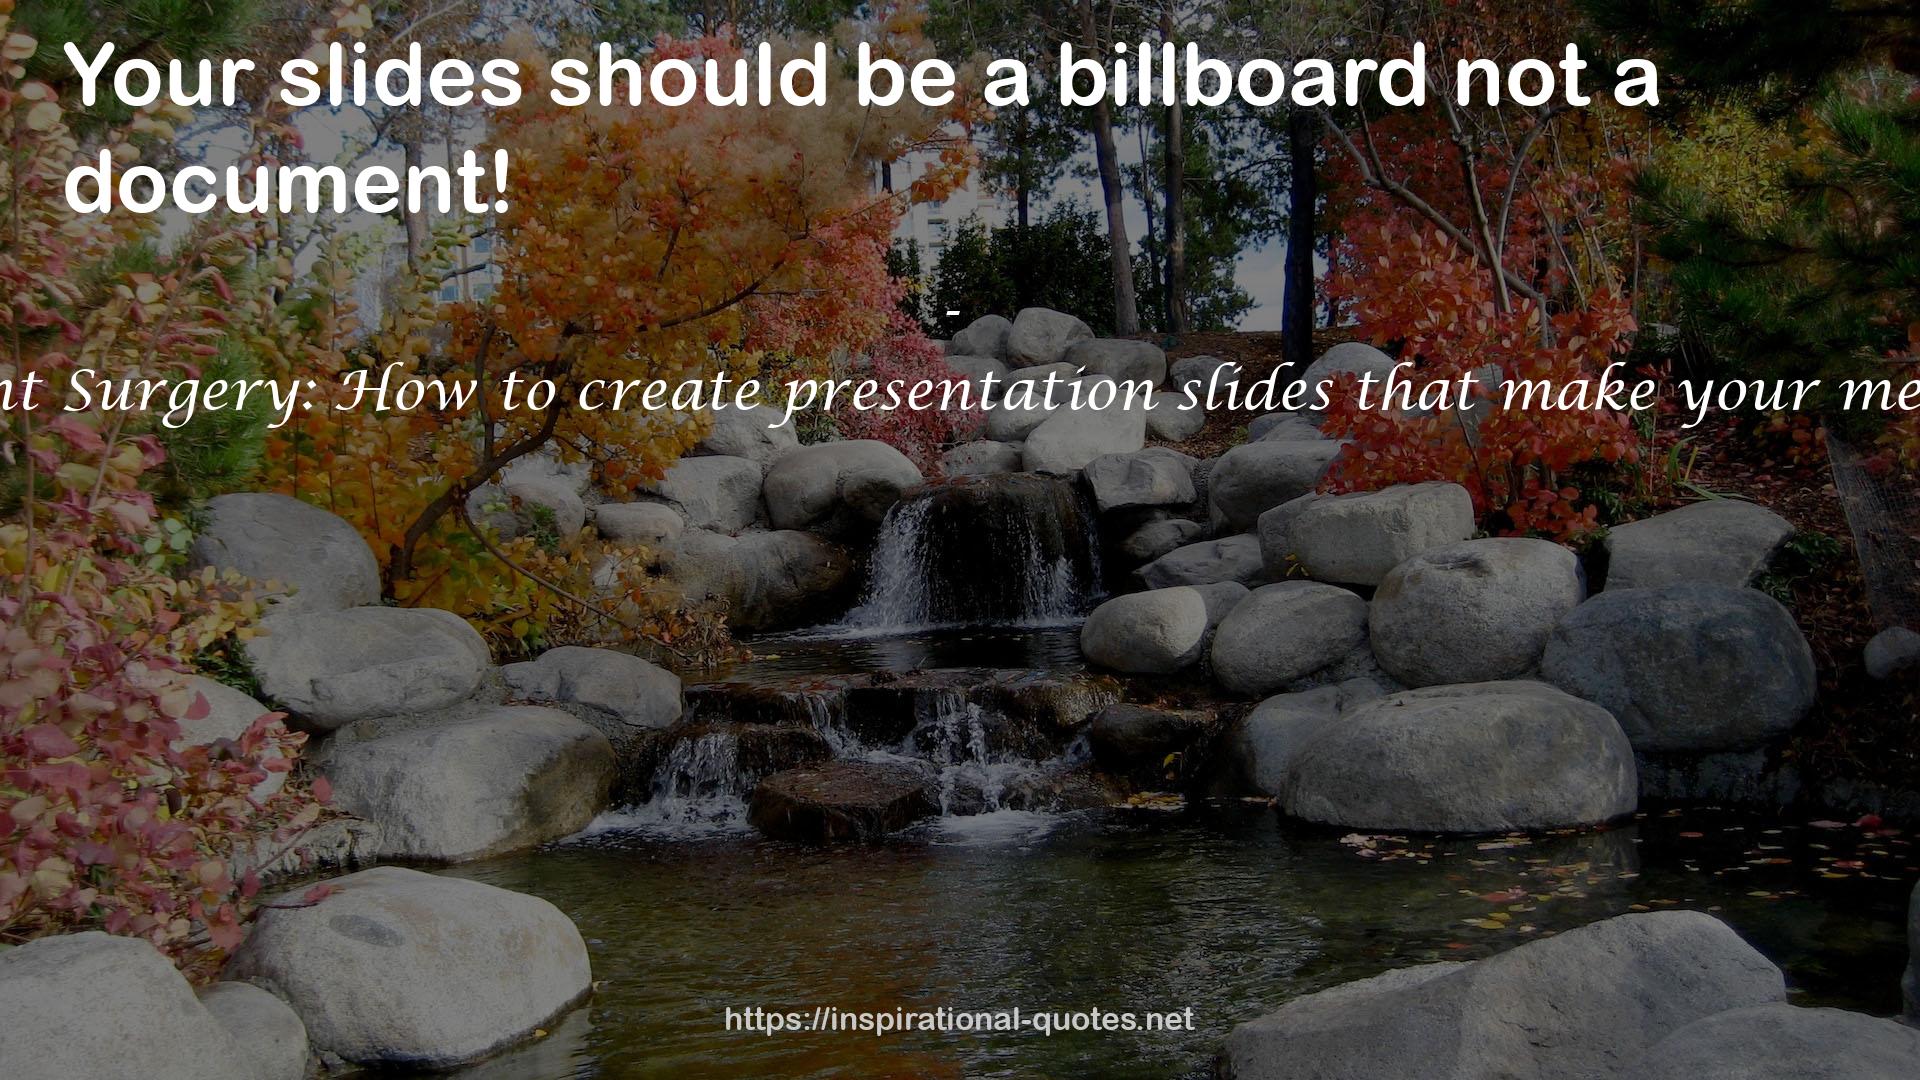 PowerPoint Surgery: How to create presentation slides that make your message stick QUOTES